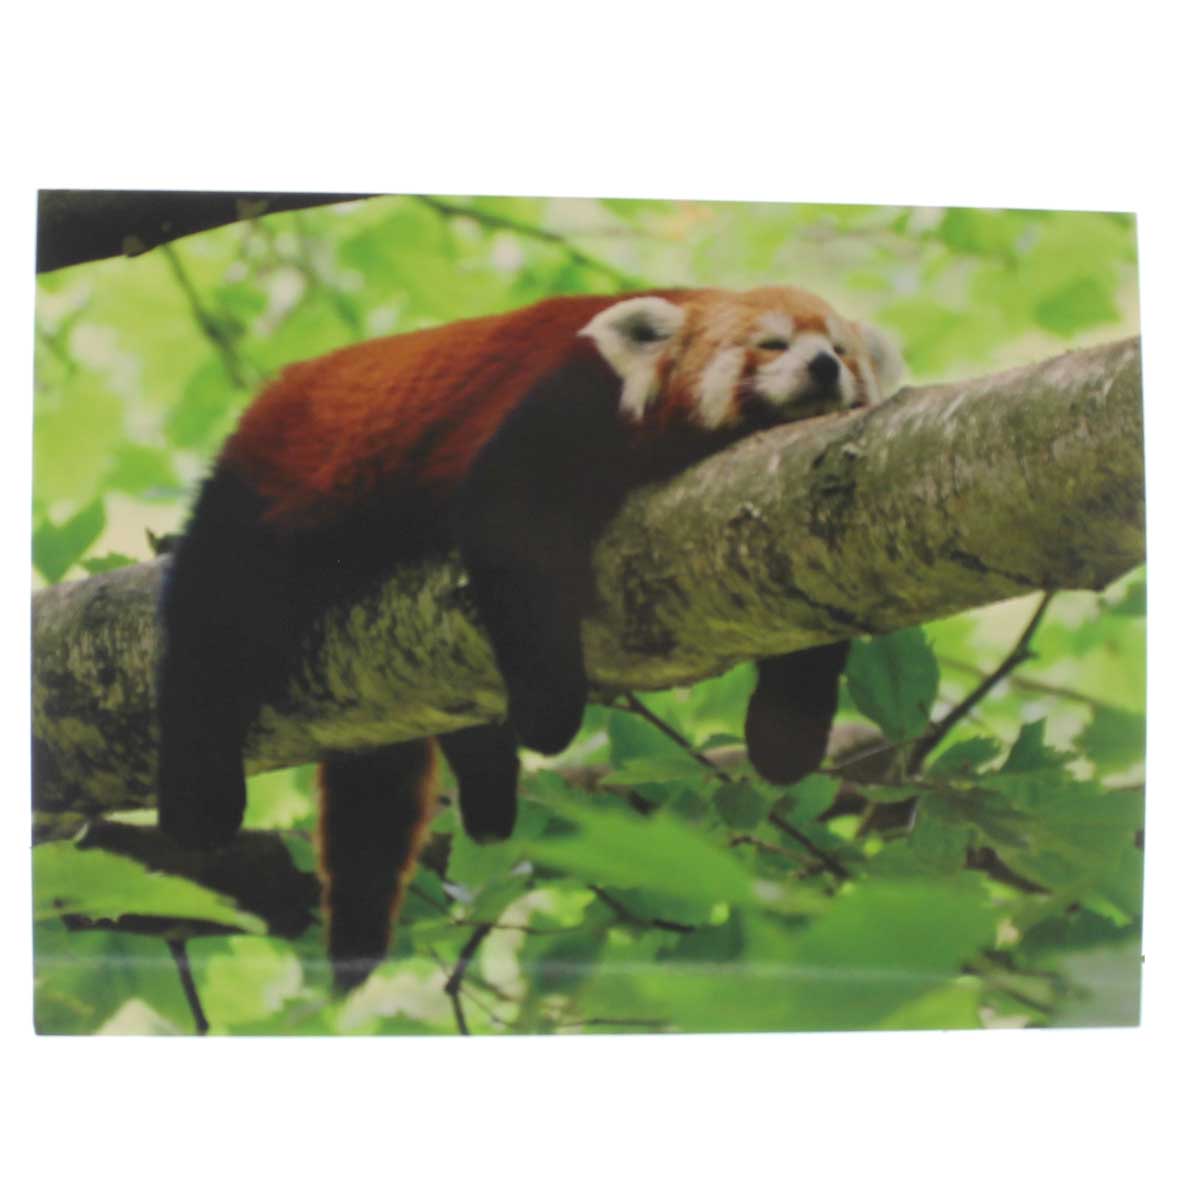 Encouragement & Support Card: Hang in there (photo of napping red panda)